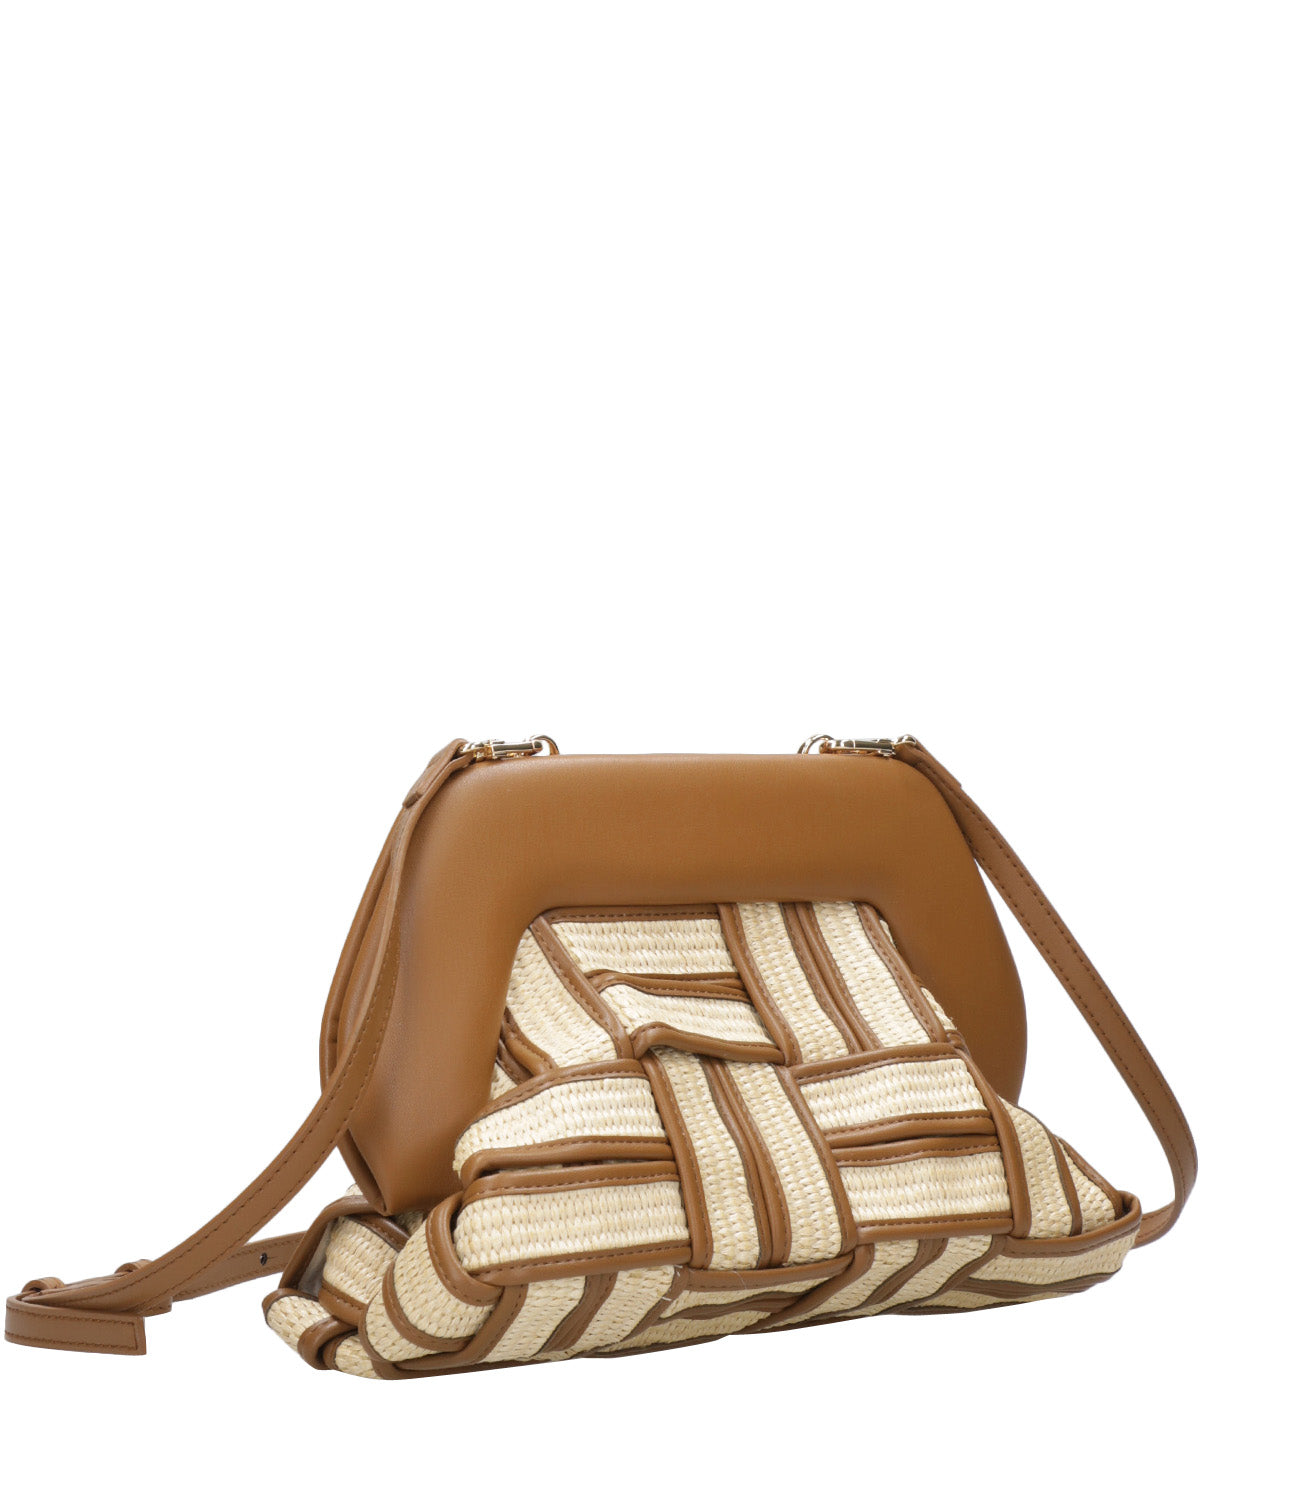 Themoiré | Tia Weaved Straw Bag Beige and Camel